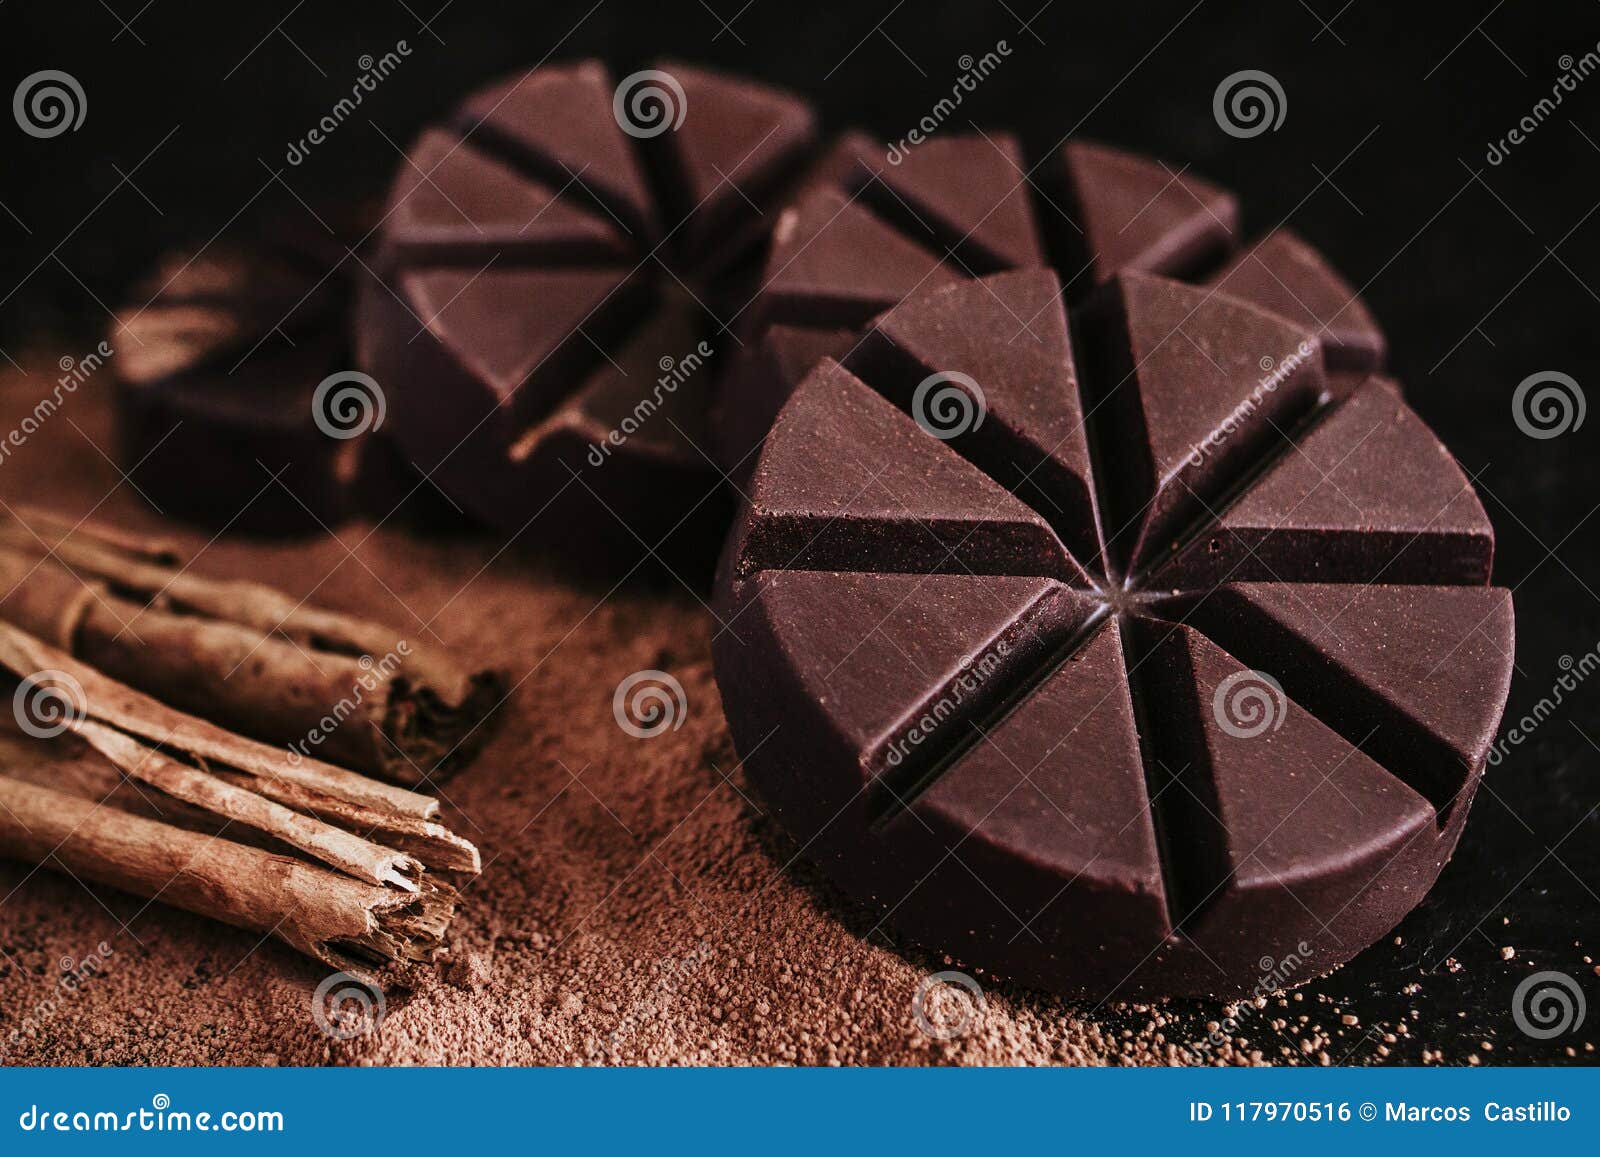 chocolate mexicano, cinnamon sticks and mexican chocolate from oaxaca mexico on wooden in rustic style